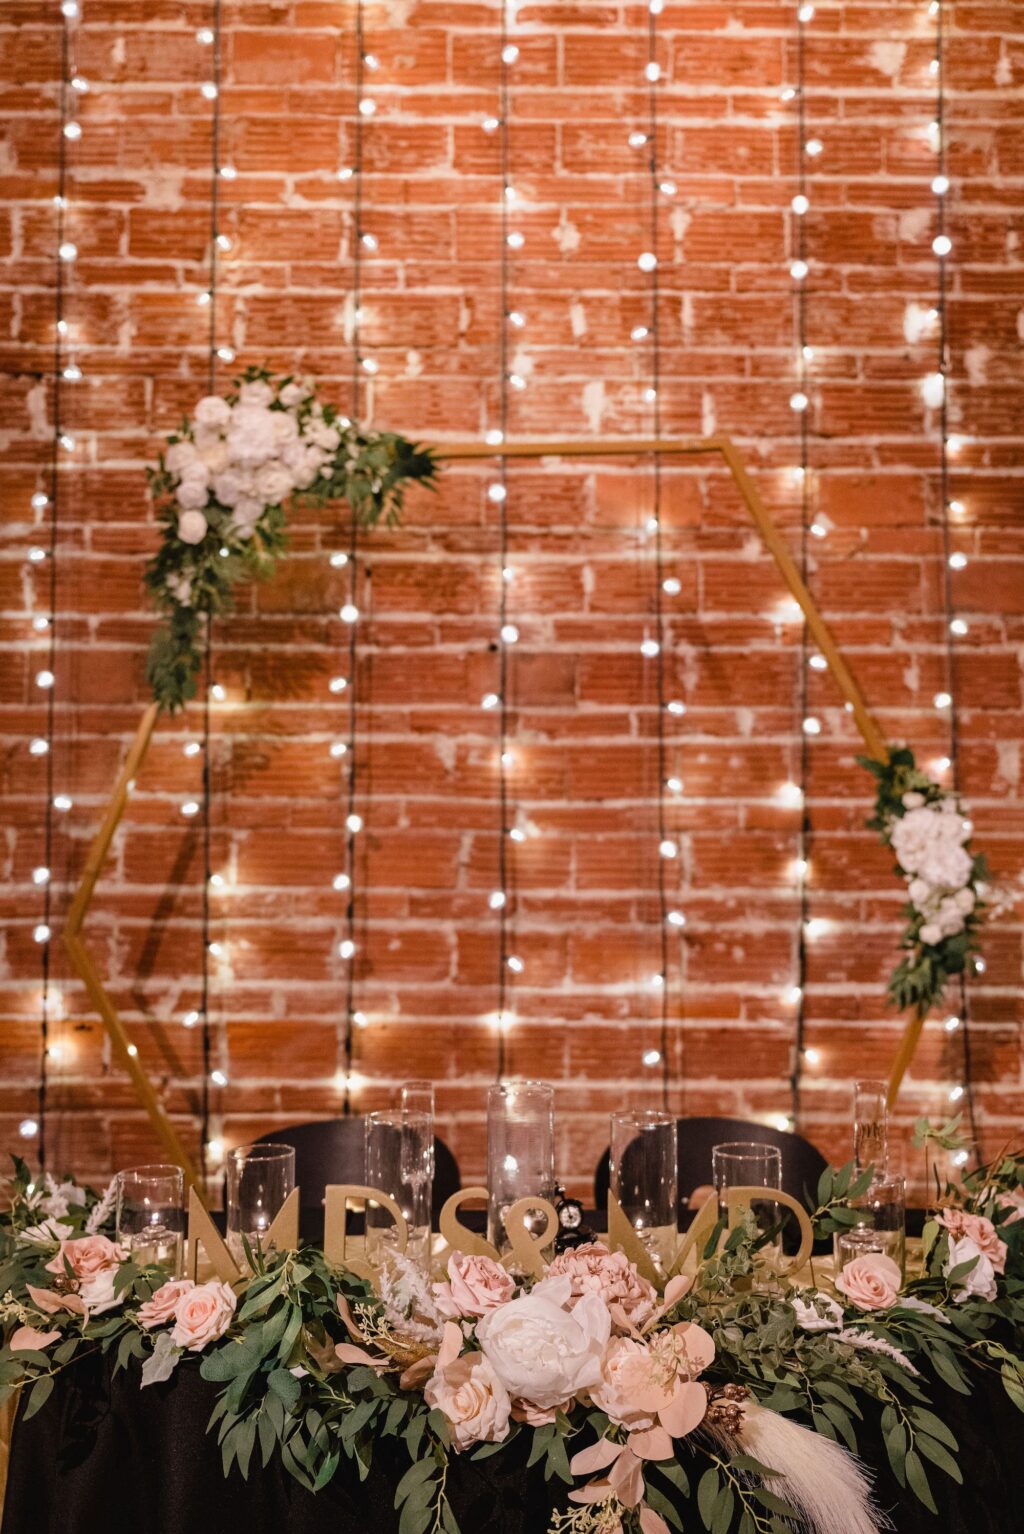 Wedding Lighting Inspiration with Greenery and White Florals Wedding Reception Sweetheart Table Decor Ideas